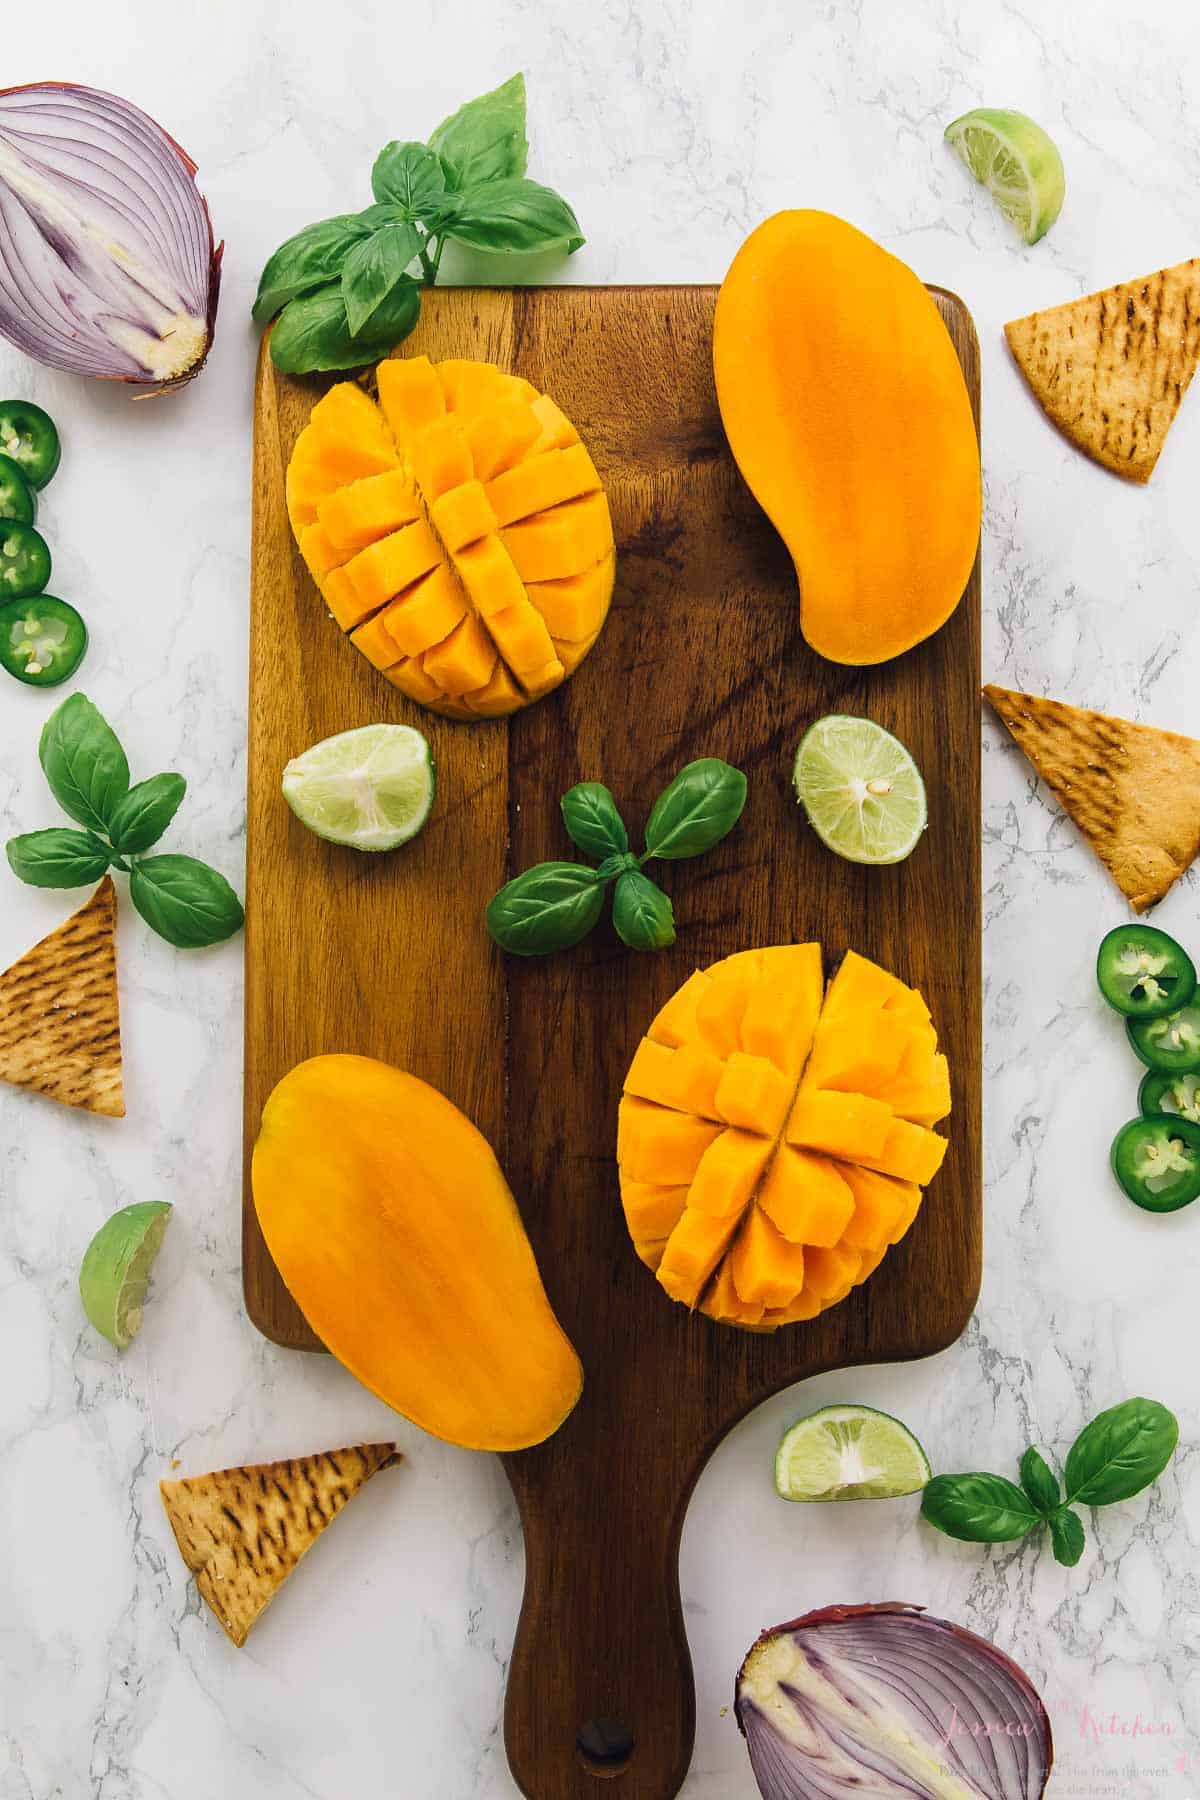 Overhead view of cut mangoes on wood cutting board with basil and limes